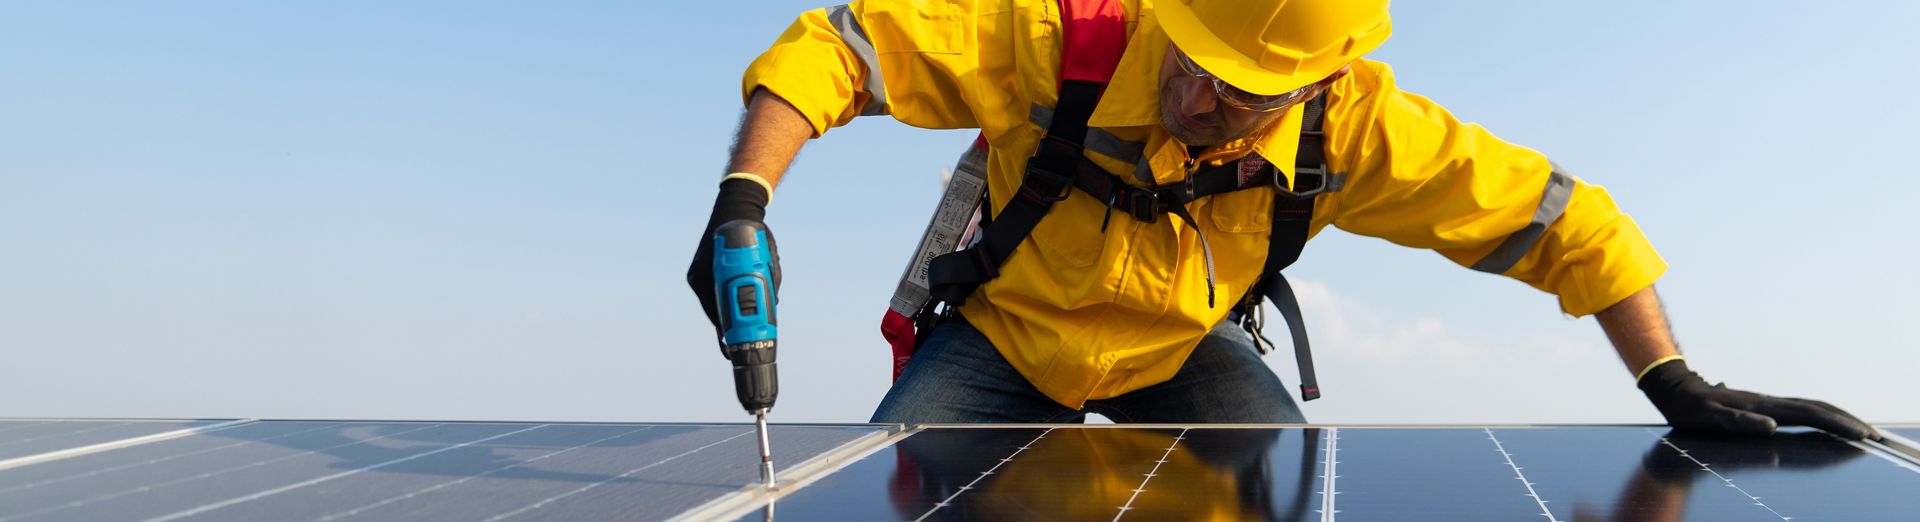 A worker with a hard hat and safety gear installing solar panels